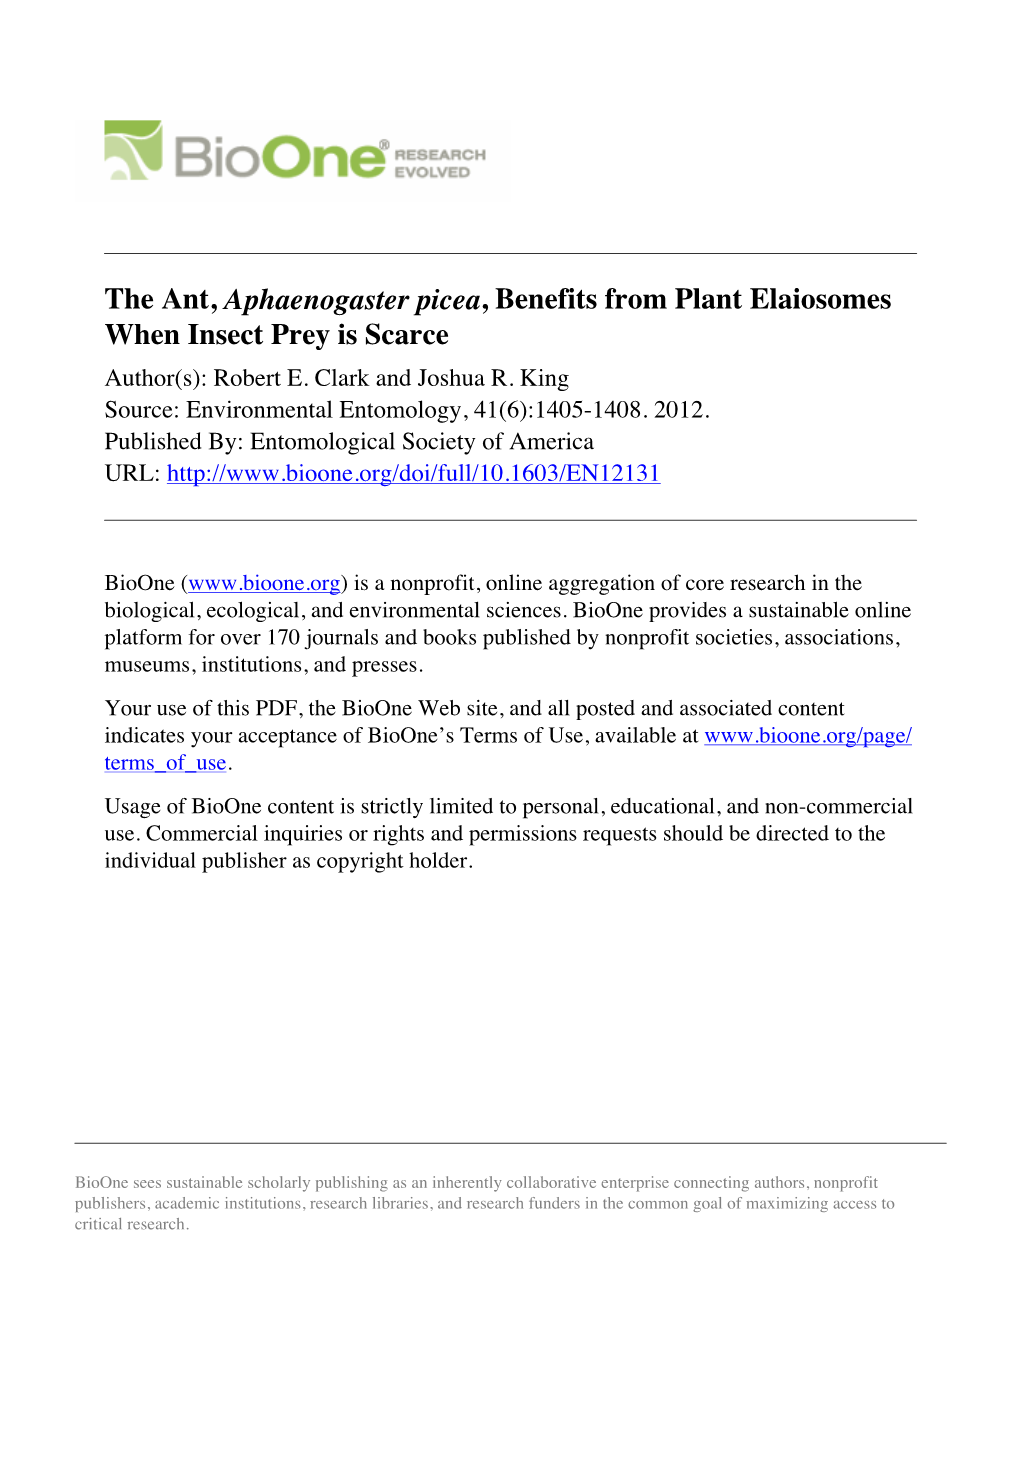 The Ant, Aphaenogaster Picea, Benefits from Plant Elaiosomes When Insect Prey Is Scarce Author(S): Robert E